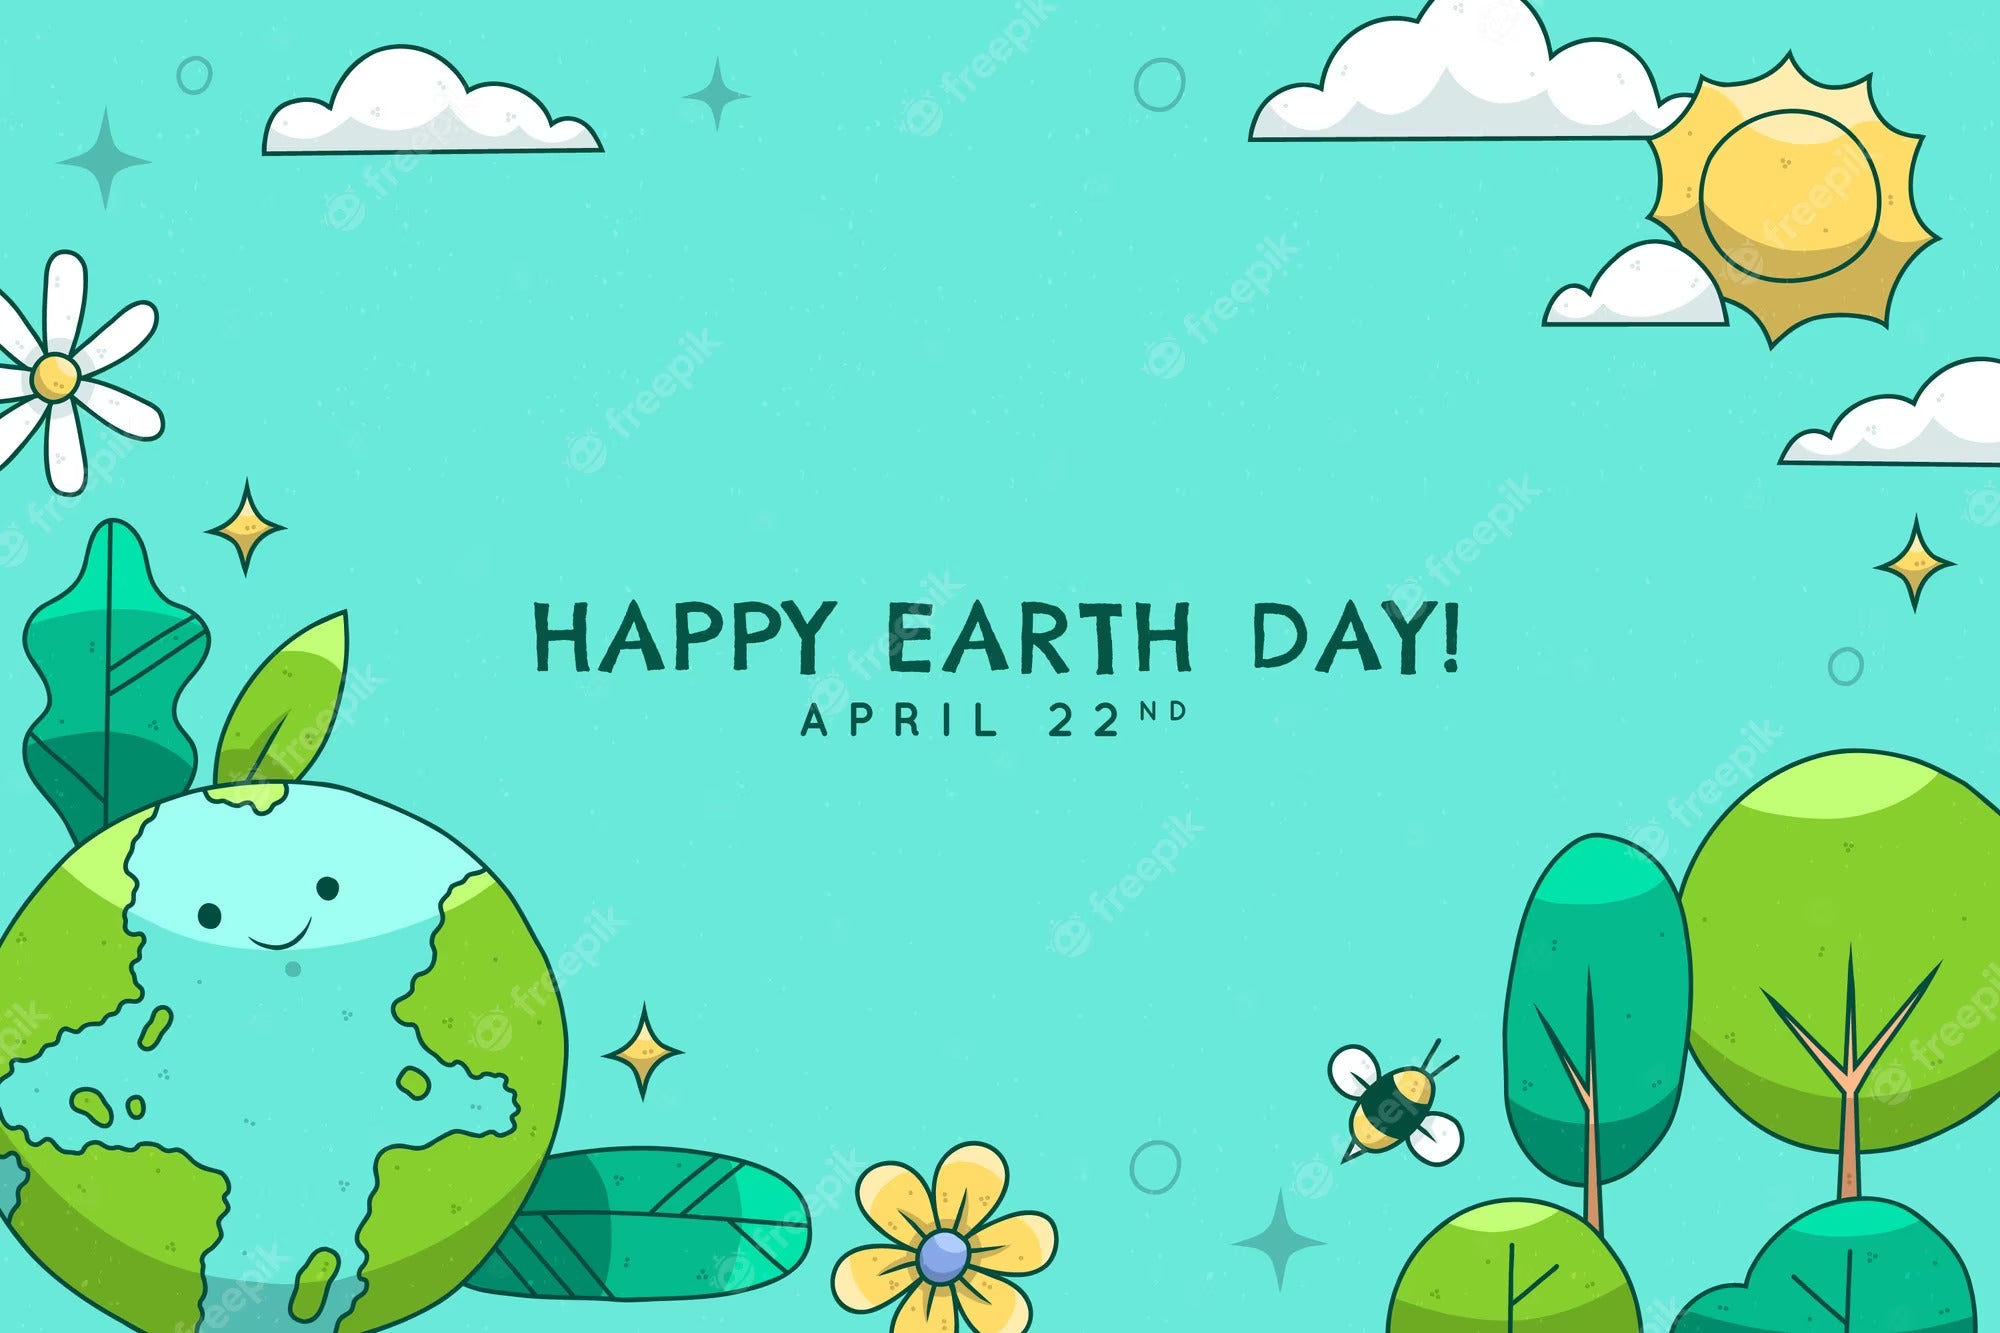 5 Favorite Kid's Books for Earth Day